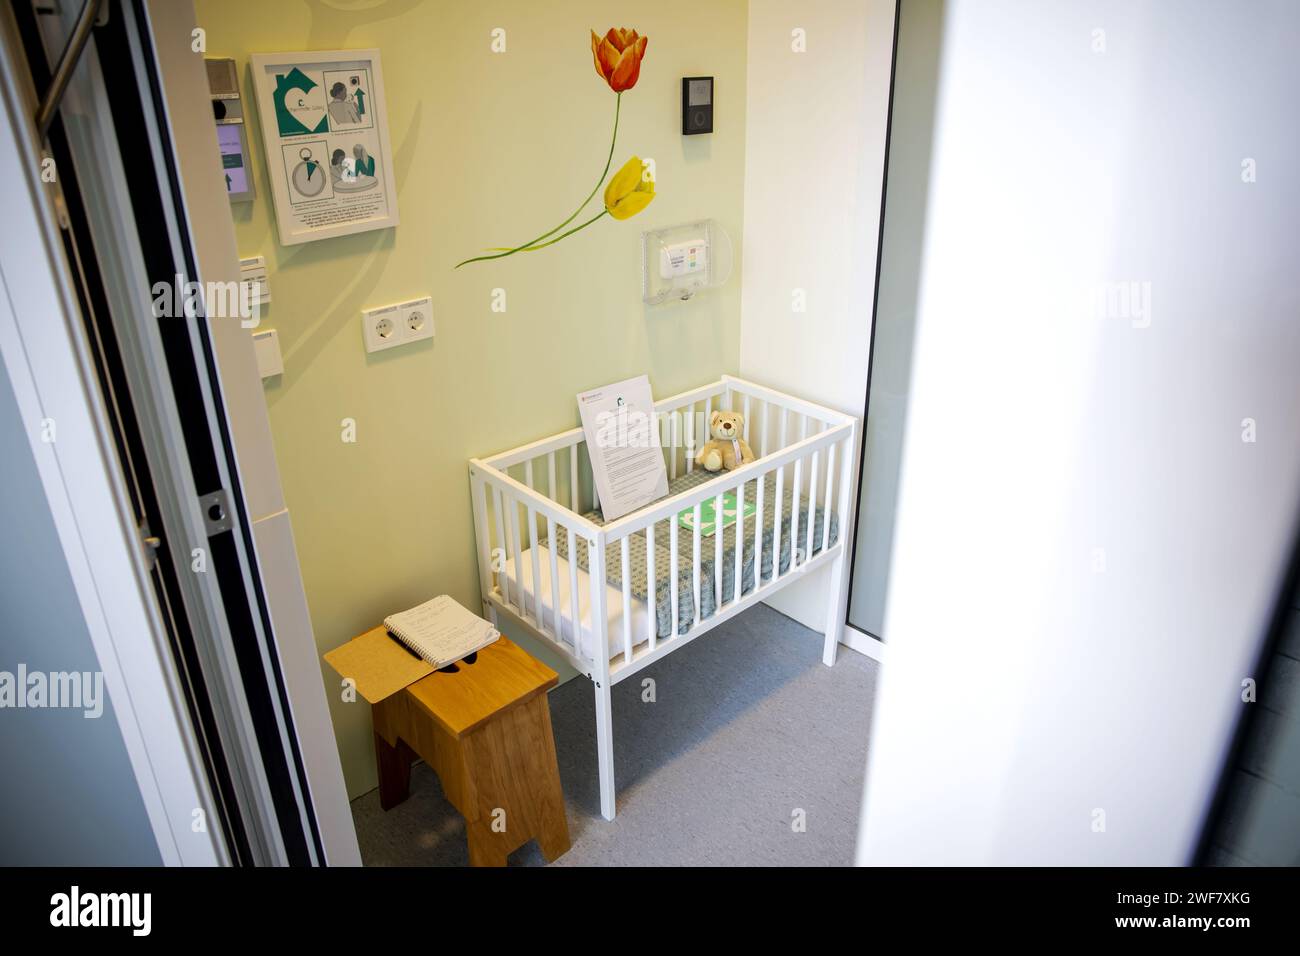 AMSTERDAM - The Protected Cradle Room in the AMC hospital. In the room, mothers in need can leave their newborn baby anonymously in the room, where immediate medical assistance is available. ANP ROBIN VAN LONKHUIJSEN netherlands out - belgium out Stock Photo